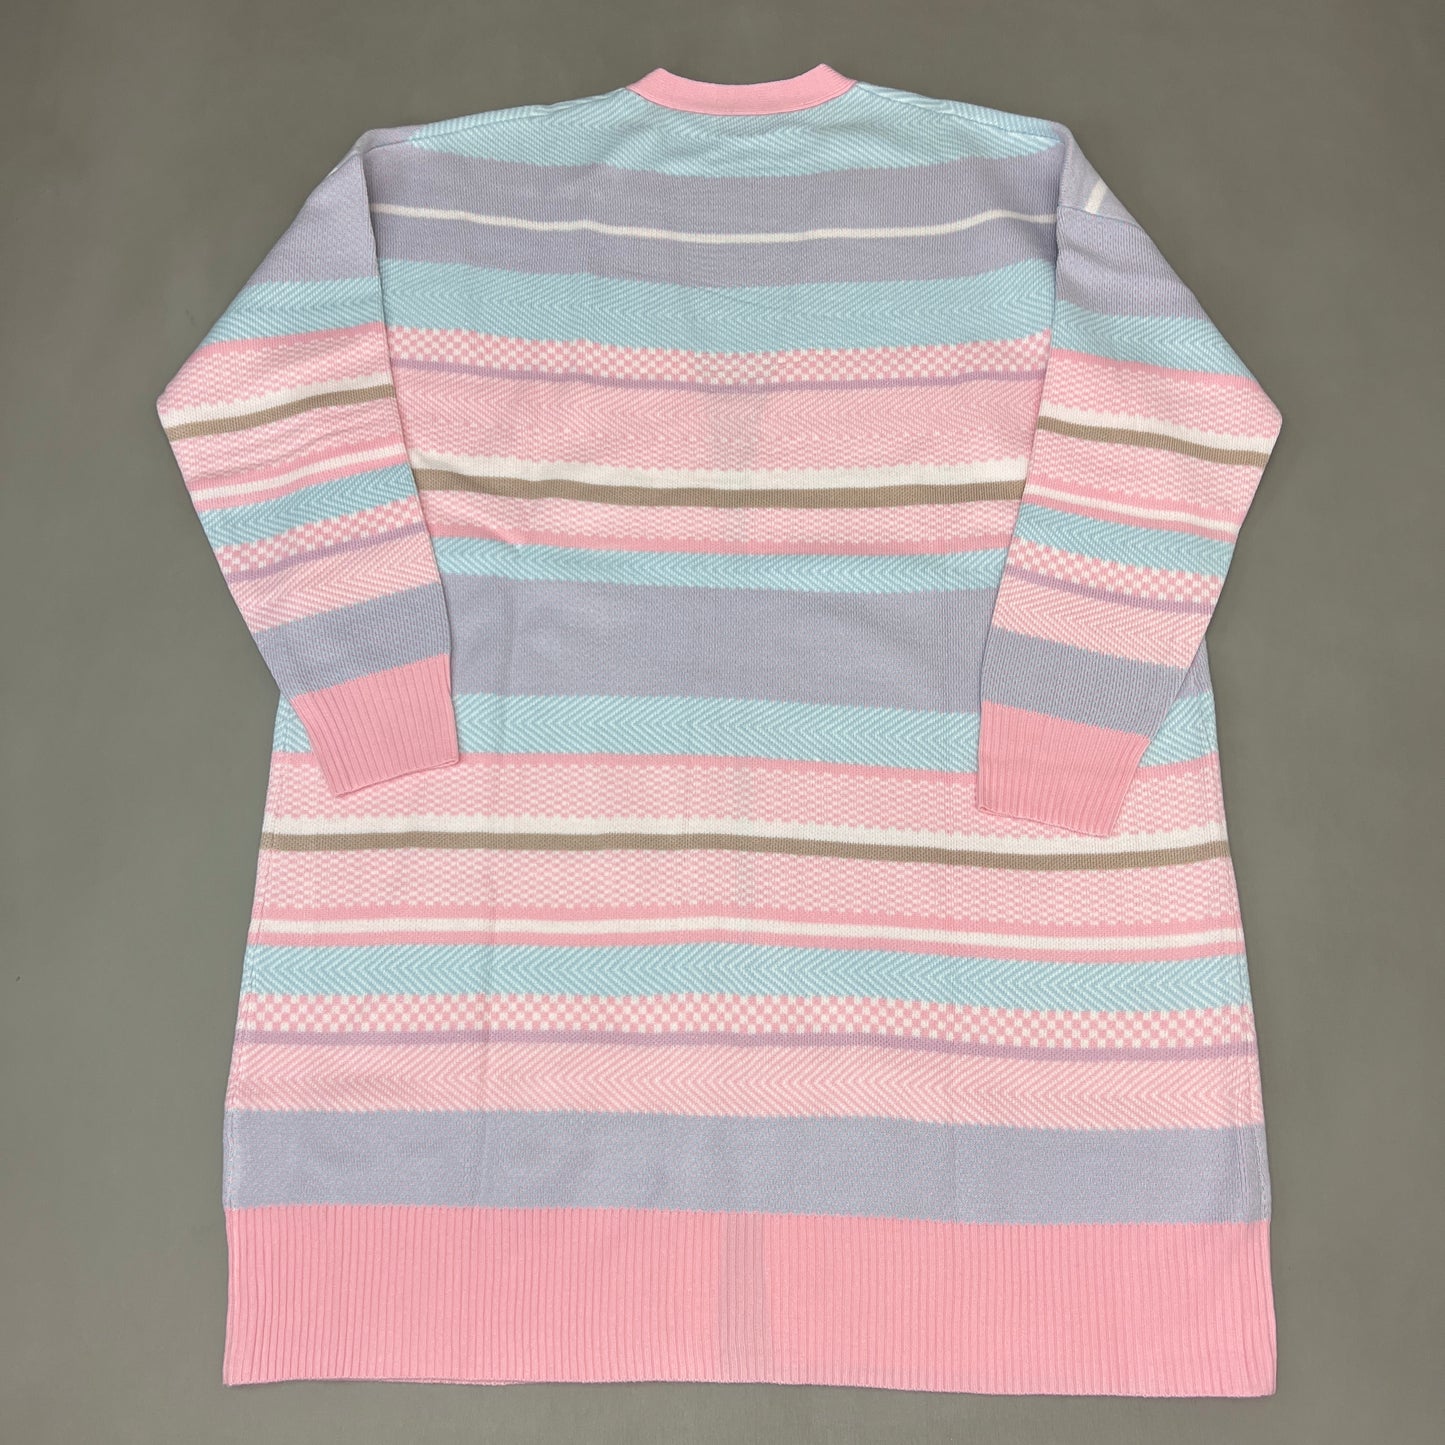 PINK LILY Multi-colored Striped Sweater Cardigan Women's Sz M PL930 (New)